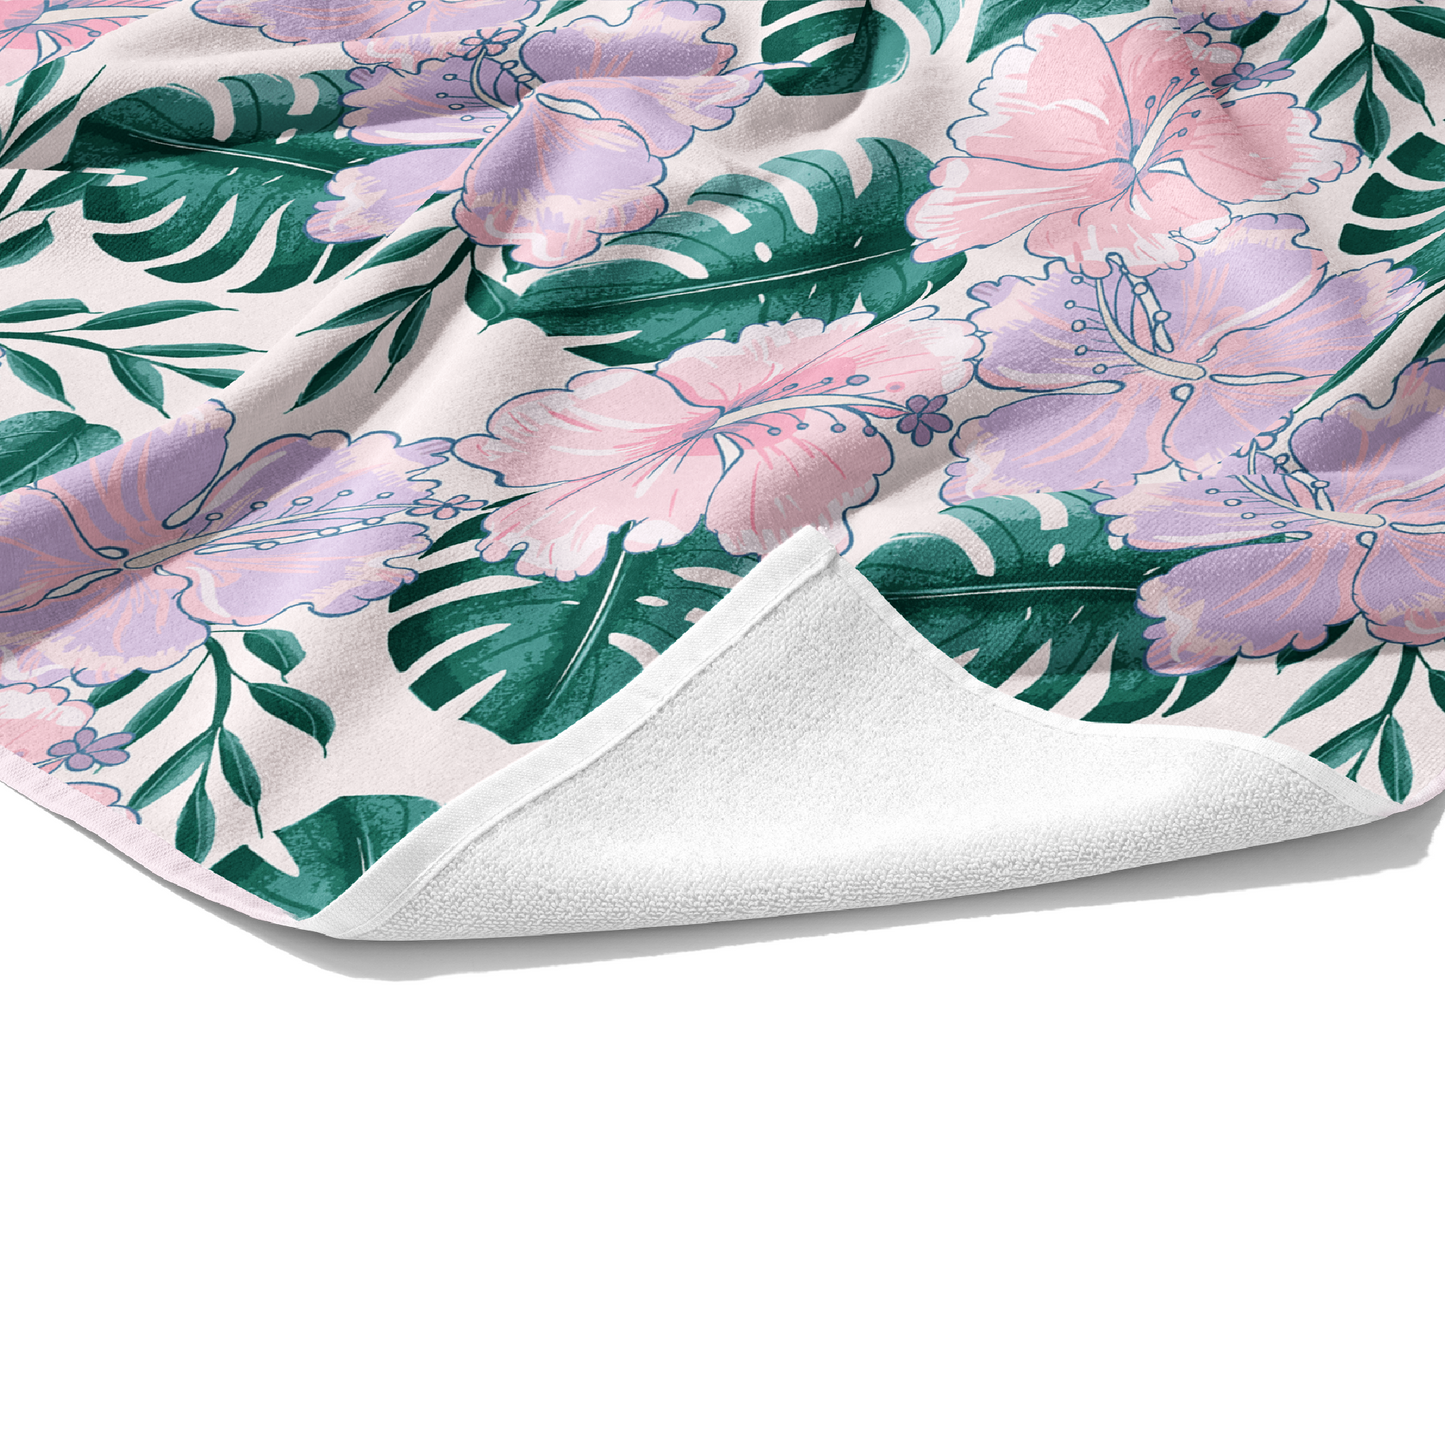 Plush white cotton towel with light pink and lavender tropical floral print on the front.